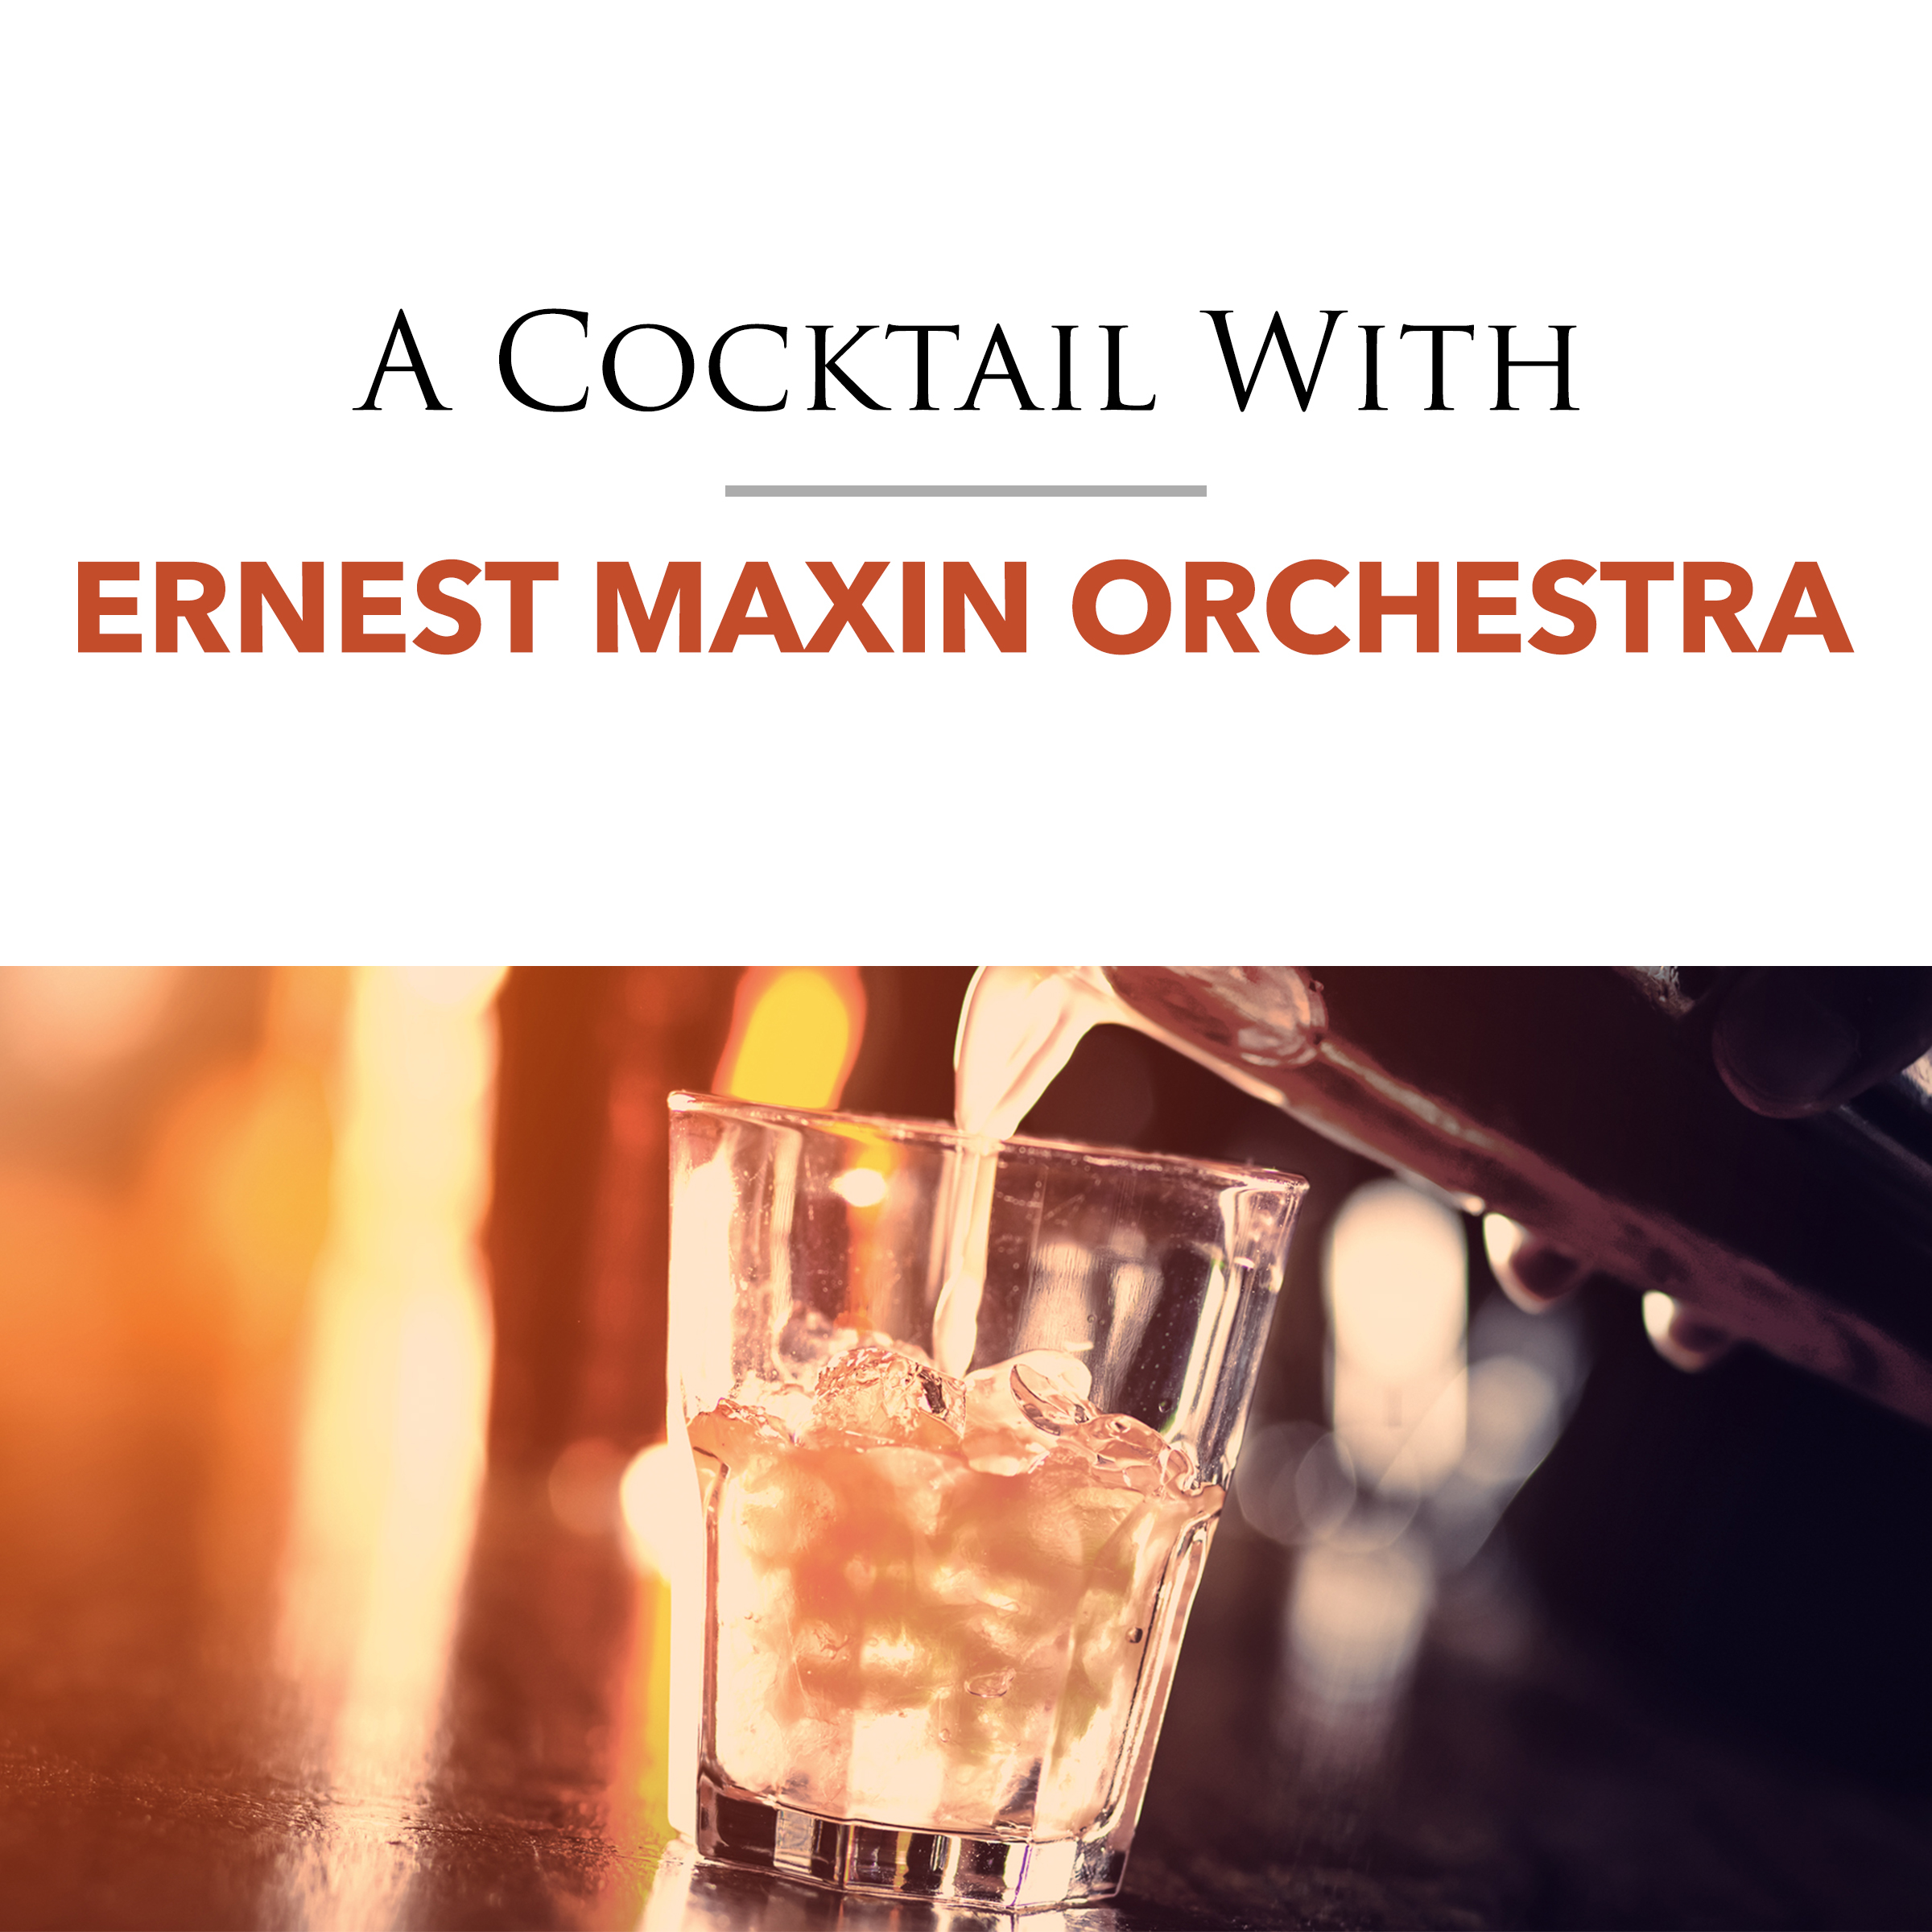 A Cocktail With Ernest Maxin